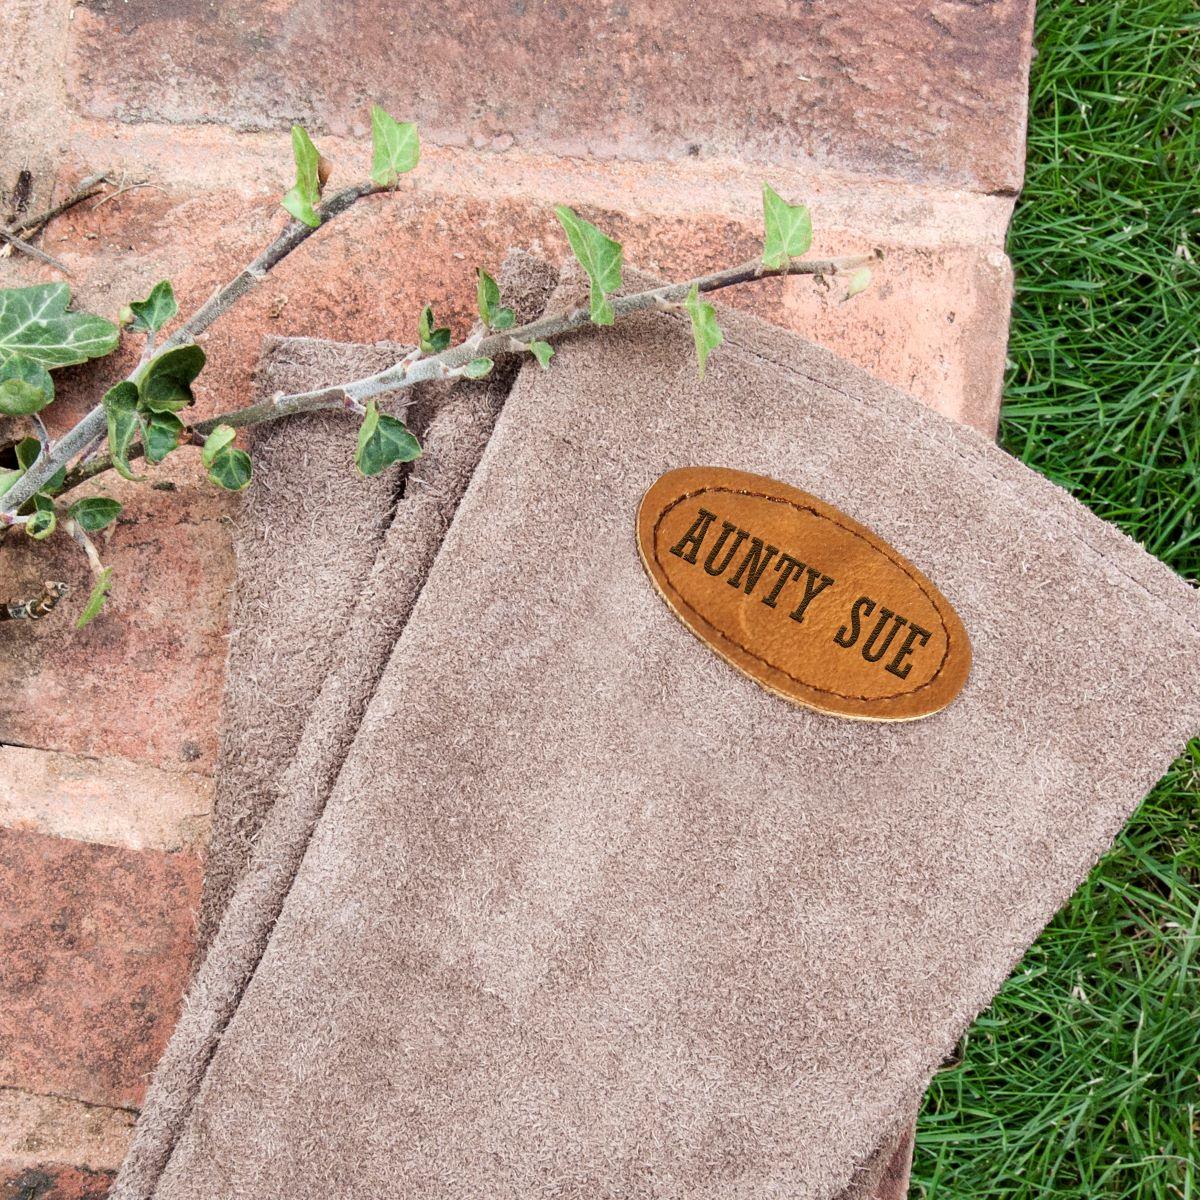 Large Brown Leather Garden Gloves - Shop Personalised Gifts